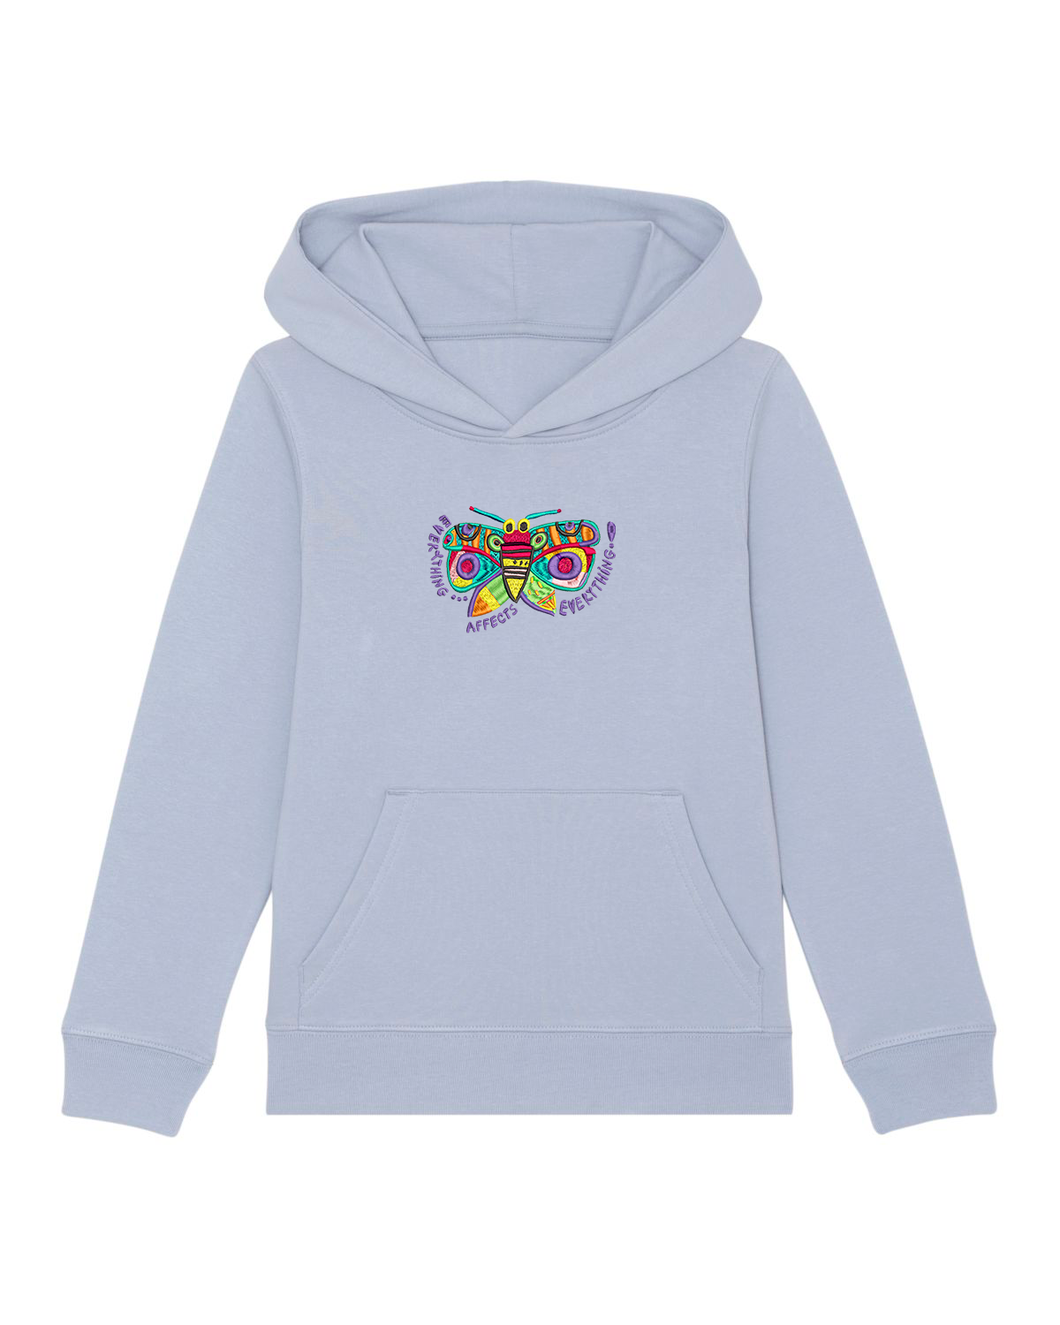 Butterfly 🦋 - Embroidered UNISEX KIDS hoodie